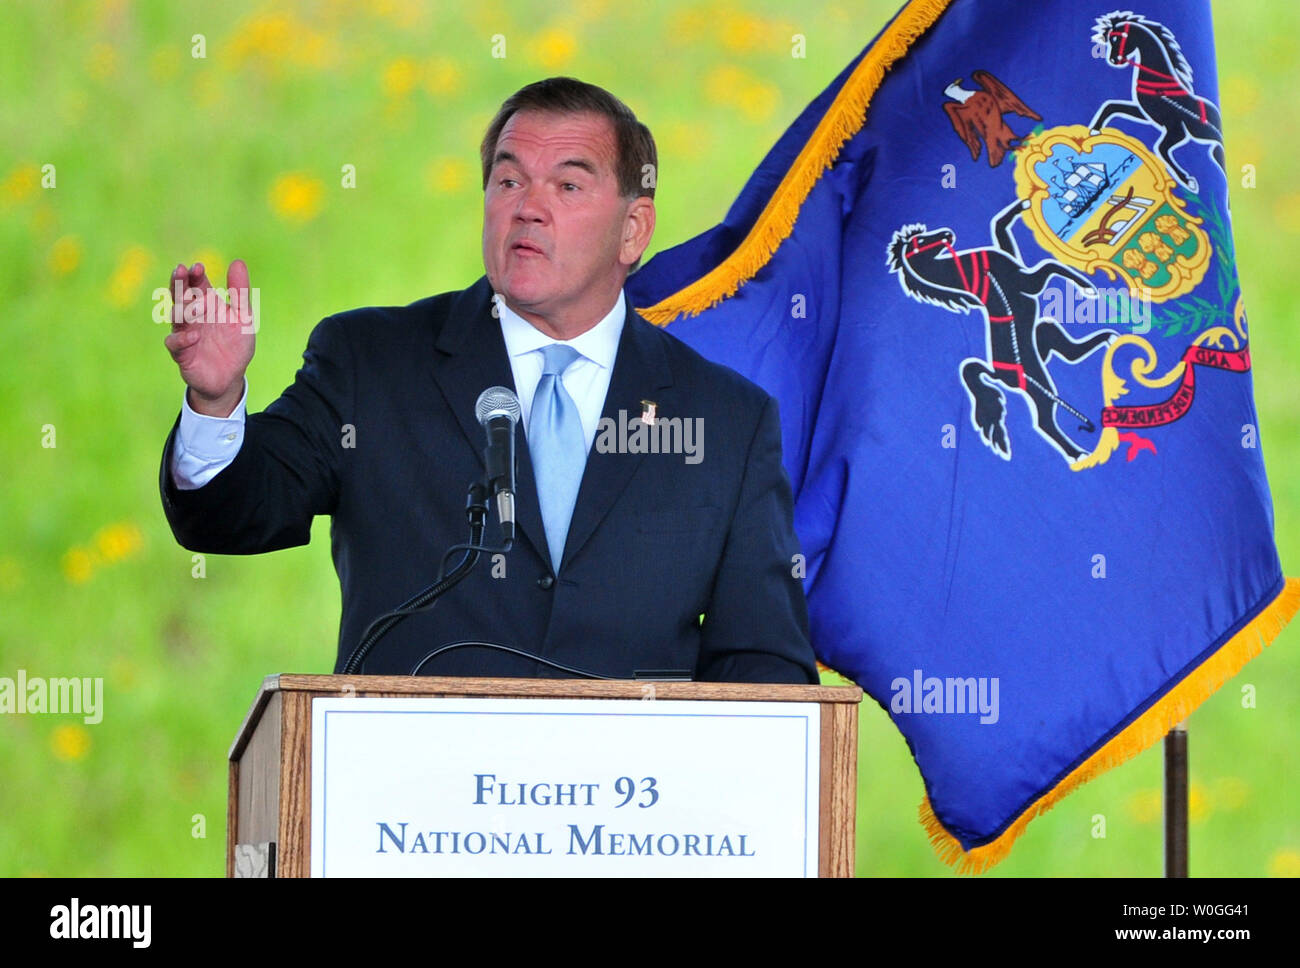 Former Governor Tom Ridge delivers remarks during a service to honor the victims of Flight 93 and to commemorate the tenth anniversary of the 9/11 terrorist attacks, on September 11, 2011 at the Flight 93 National Memorial in Shanksville, Pennsylvania. The Flight 93 Memorial honors the victims of United flight 93 which crashed in Shanksville after the passengers fought back against the hijackers. The plane, which was believed to be headed to a target in Washington, D.C. was downed in the field. UPI/Kevin Dietsch Stock Photo